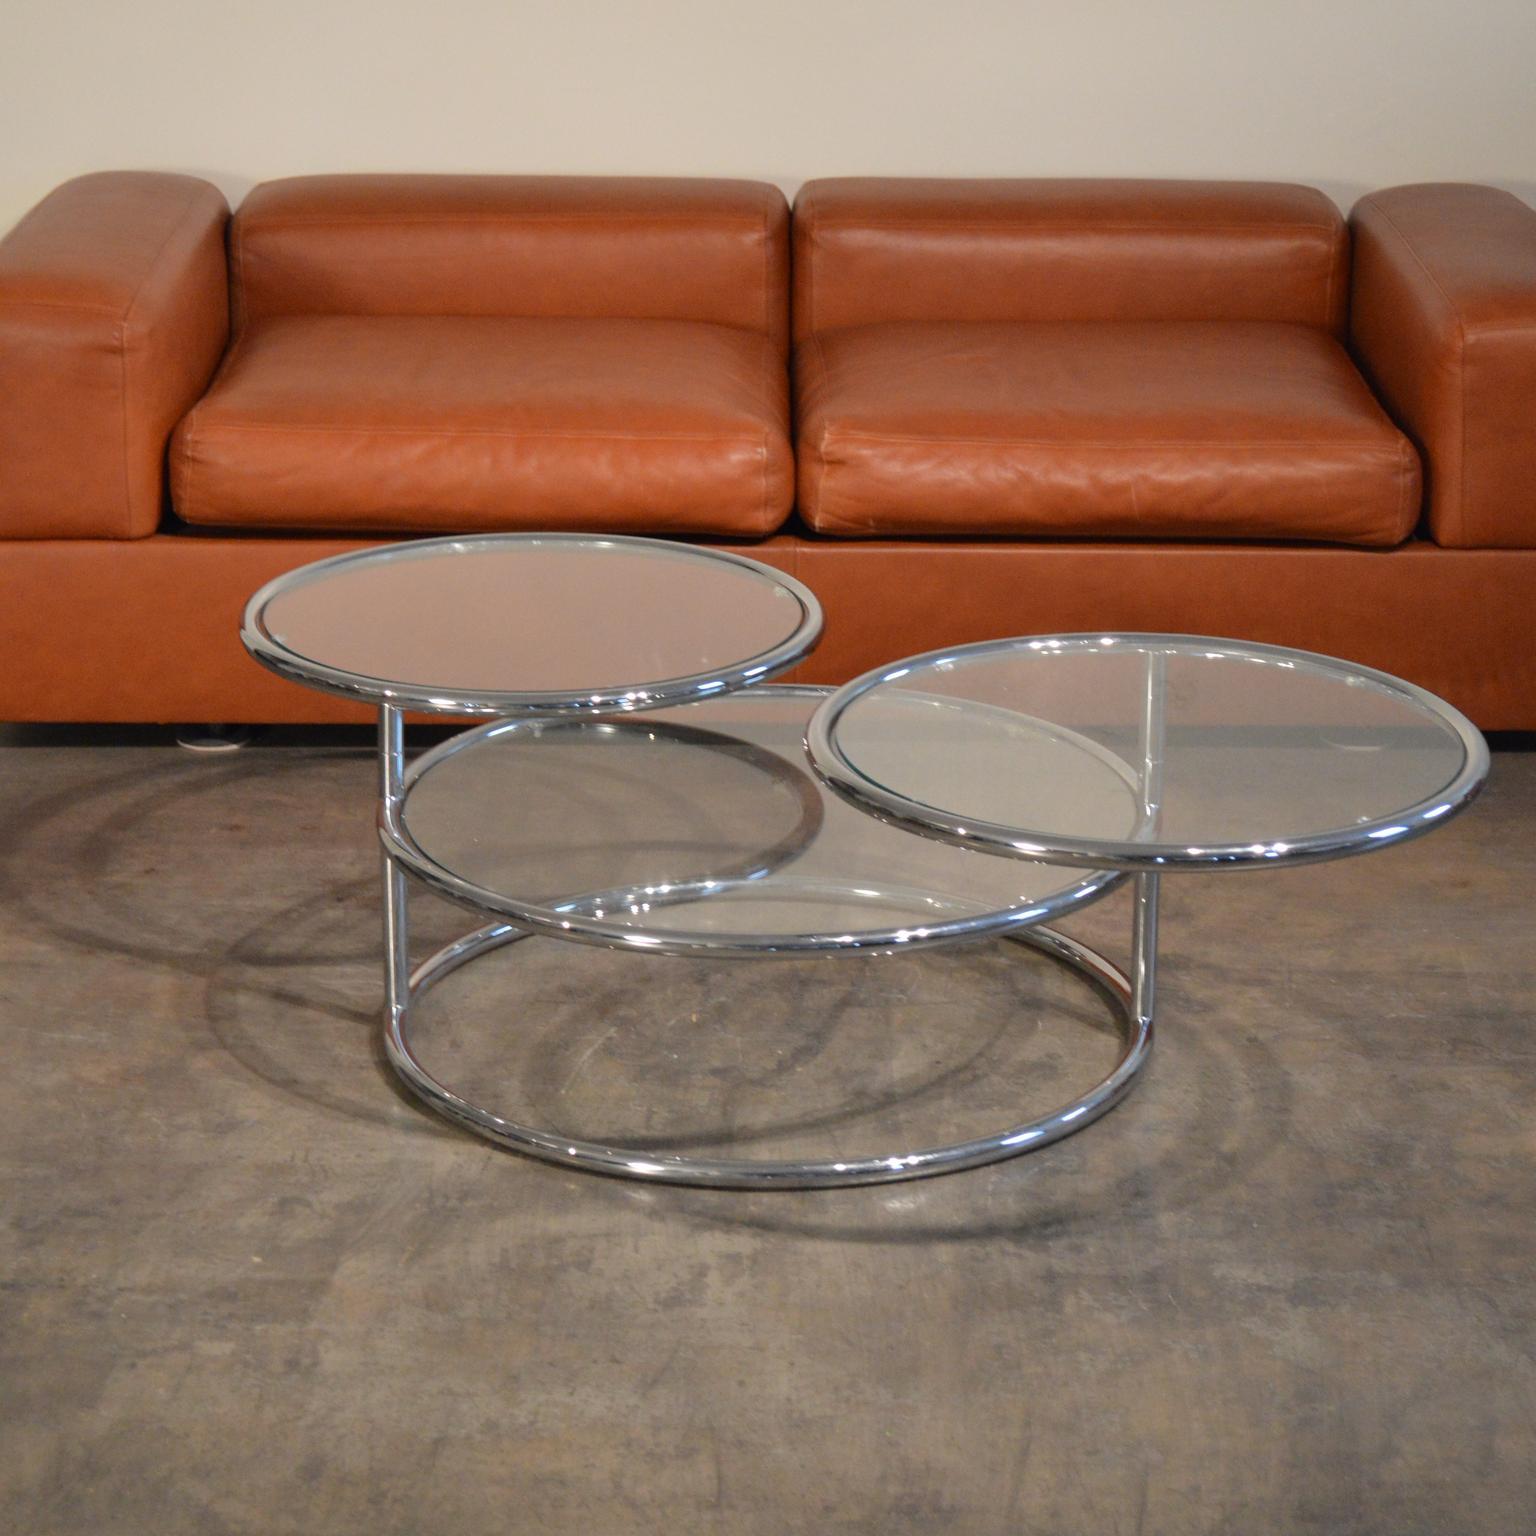 Three Tier Glass and Tubular Chrome Articulating Cocktail Table c. 1970's For Sale 1